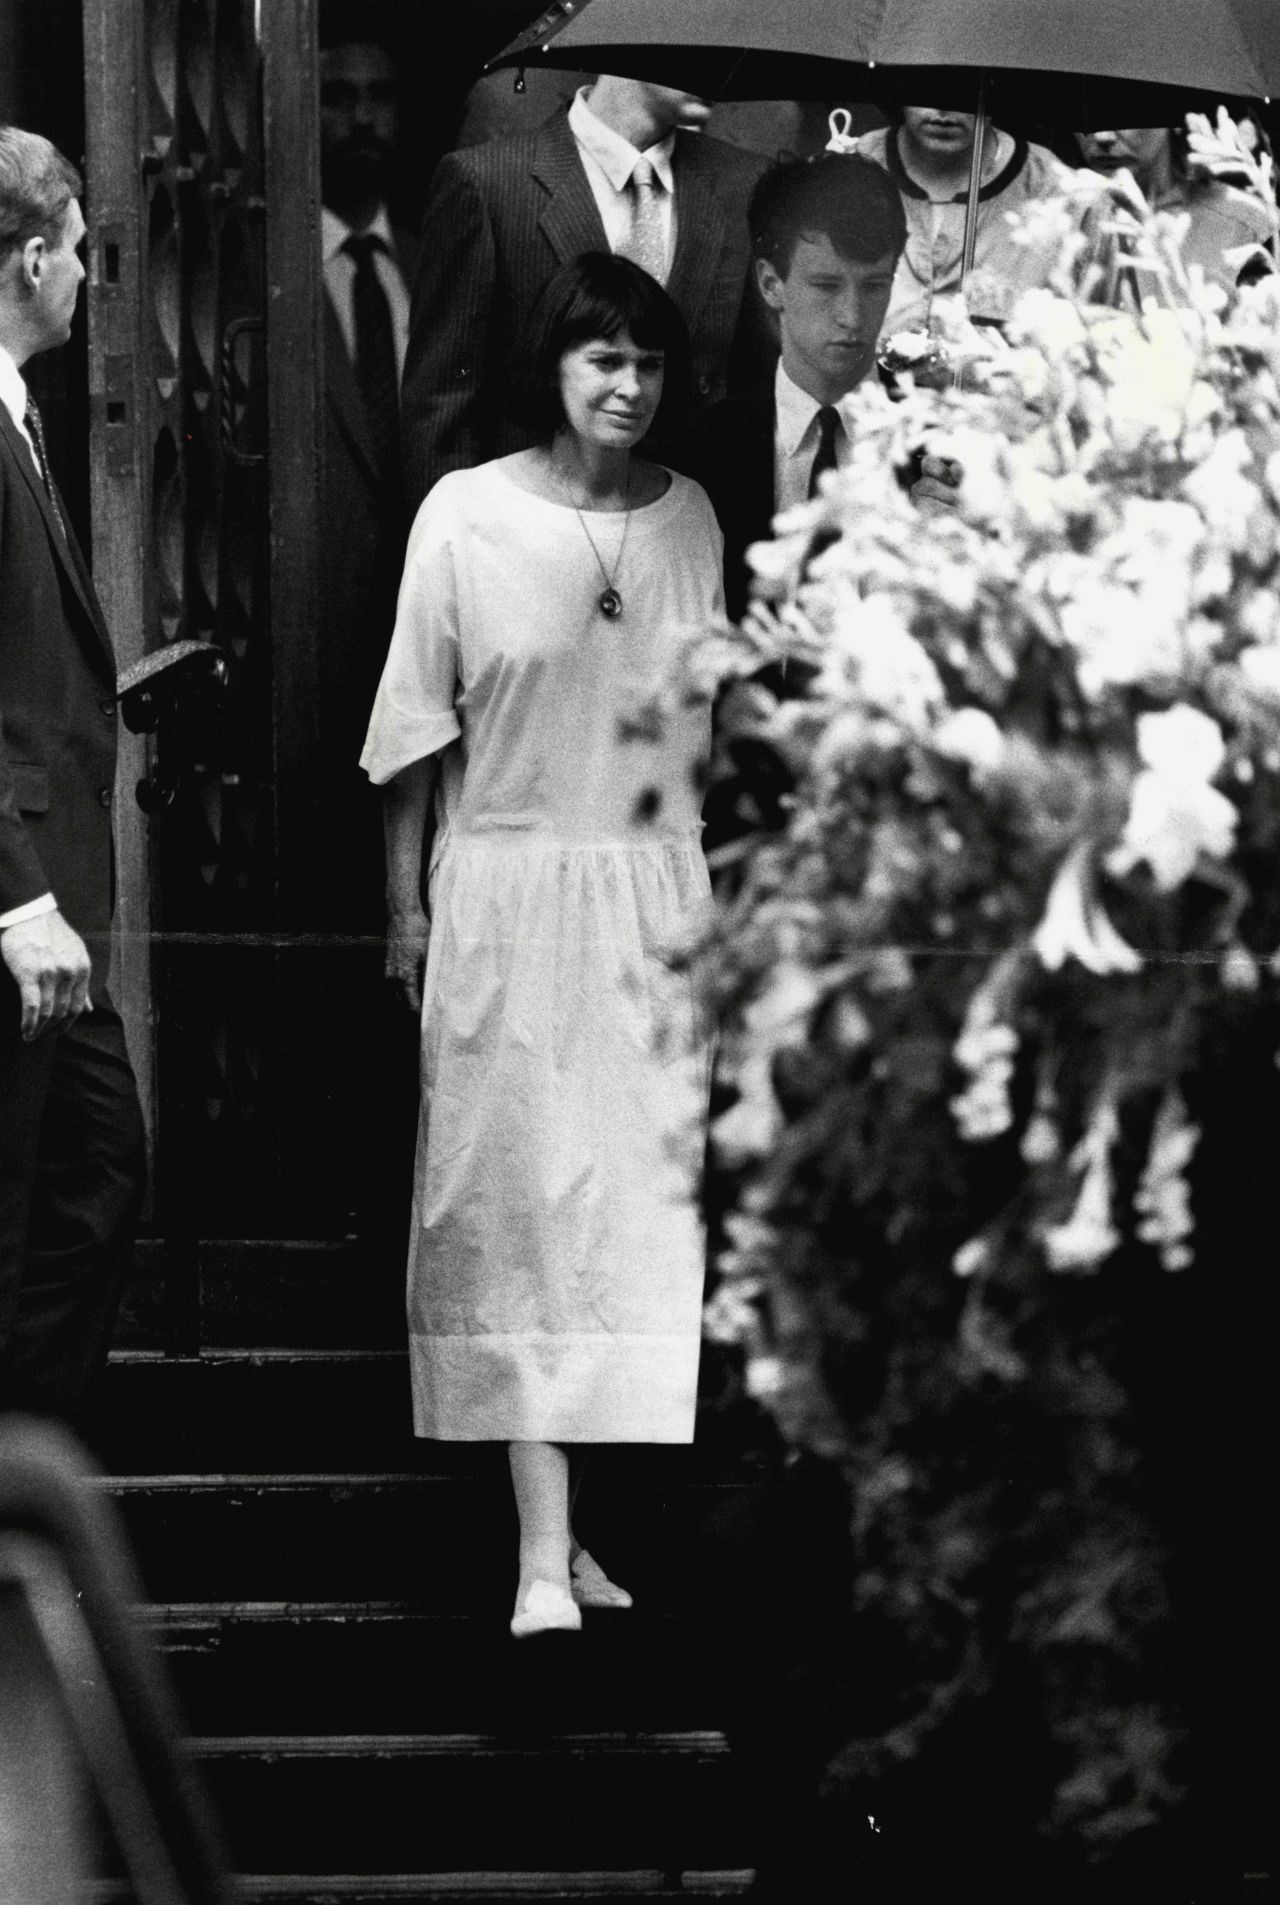 Vanderbilt attends the funeral of her son Carter in 1988. The 23-year-old, who had been suffering from depression, jumped from the 14th-floor terrace of his parents' penthouse in Manhattan.